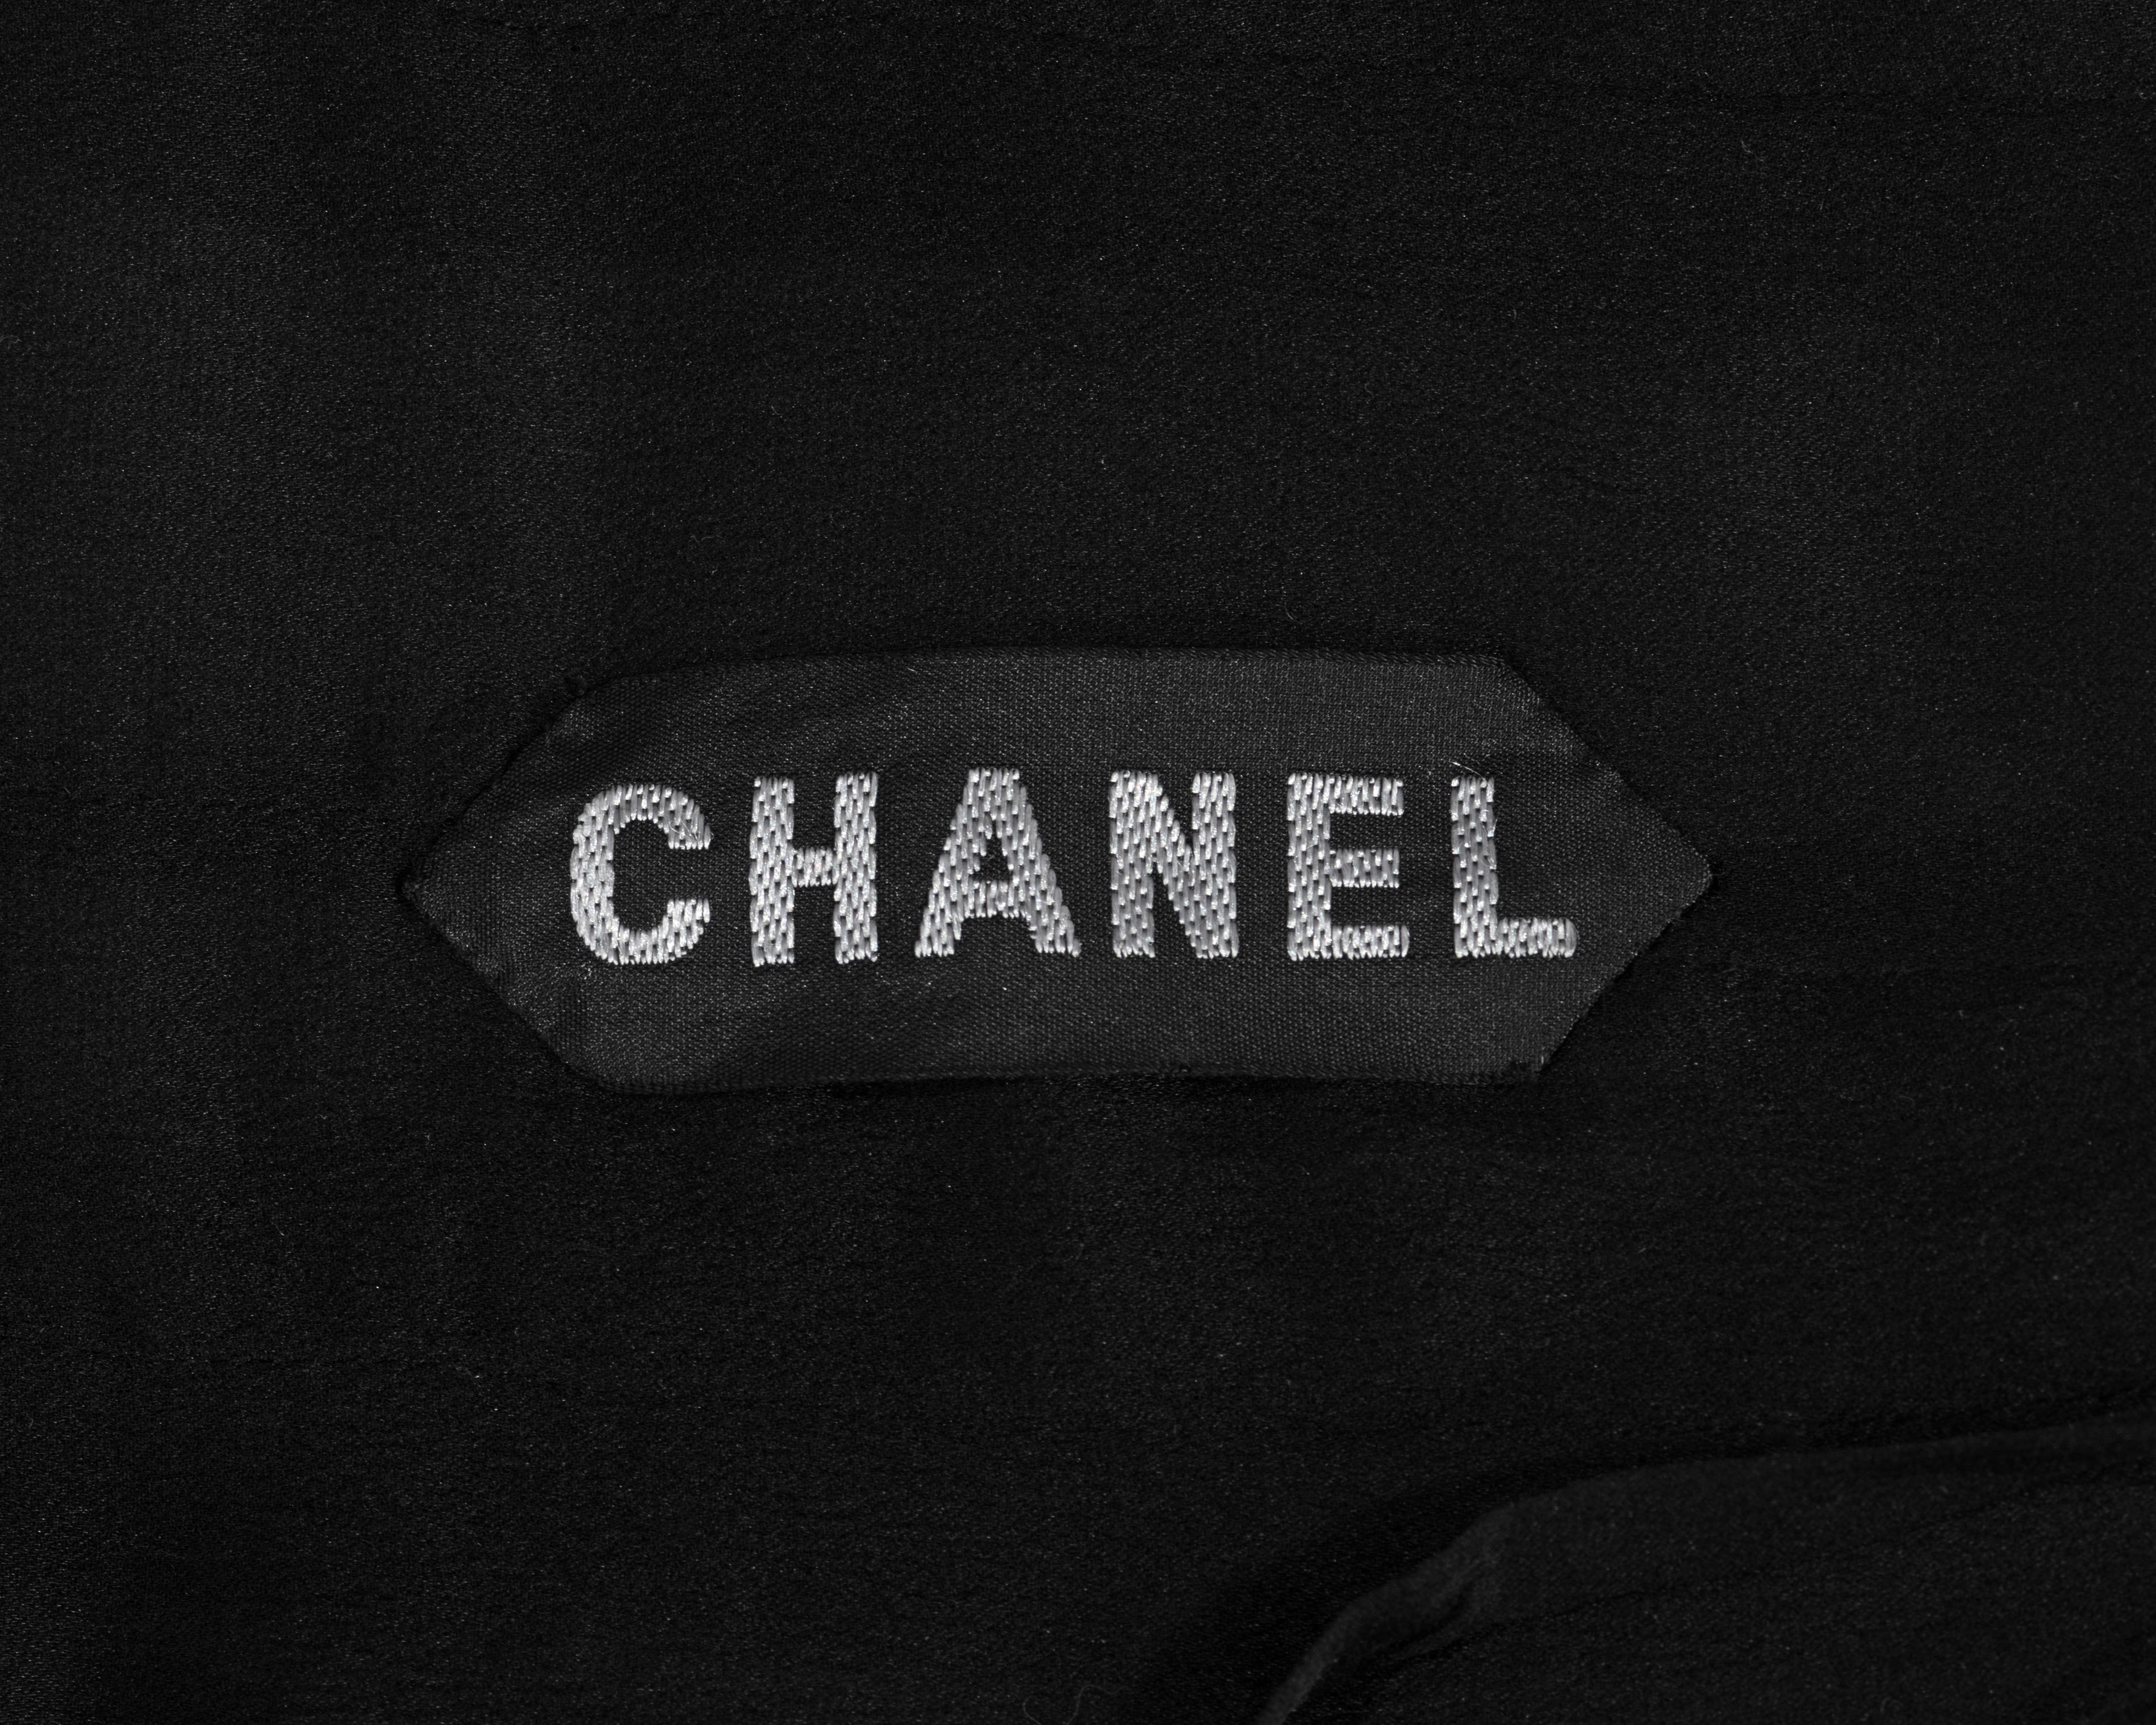 Chanel by Karl Lagerfeld Haute Couture Black Silk Evening Dress, fw 1994 For Sale 16